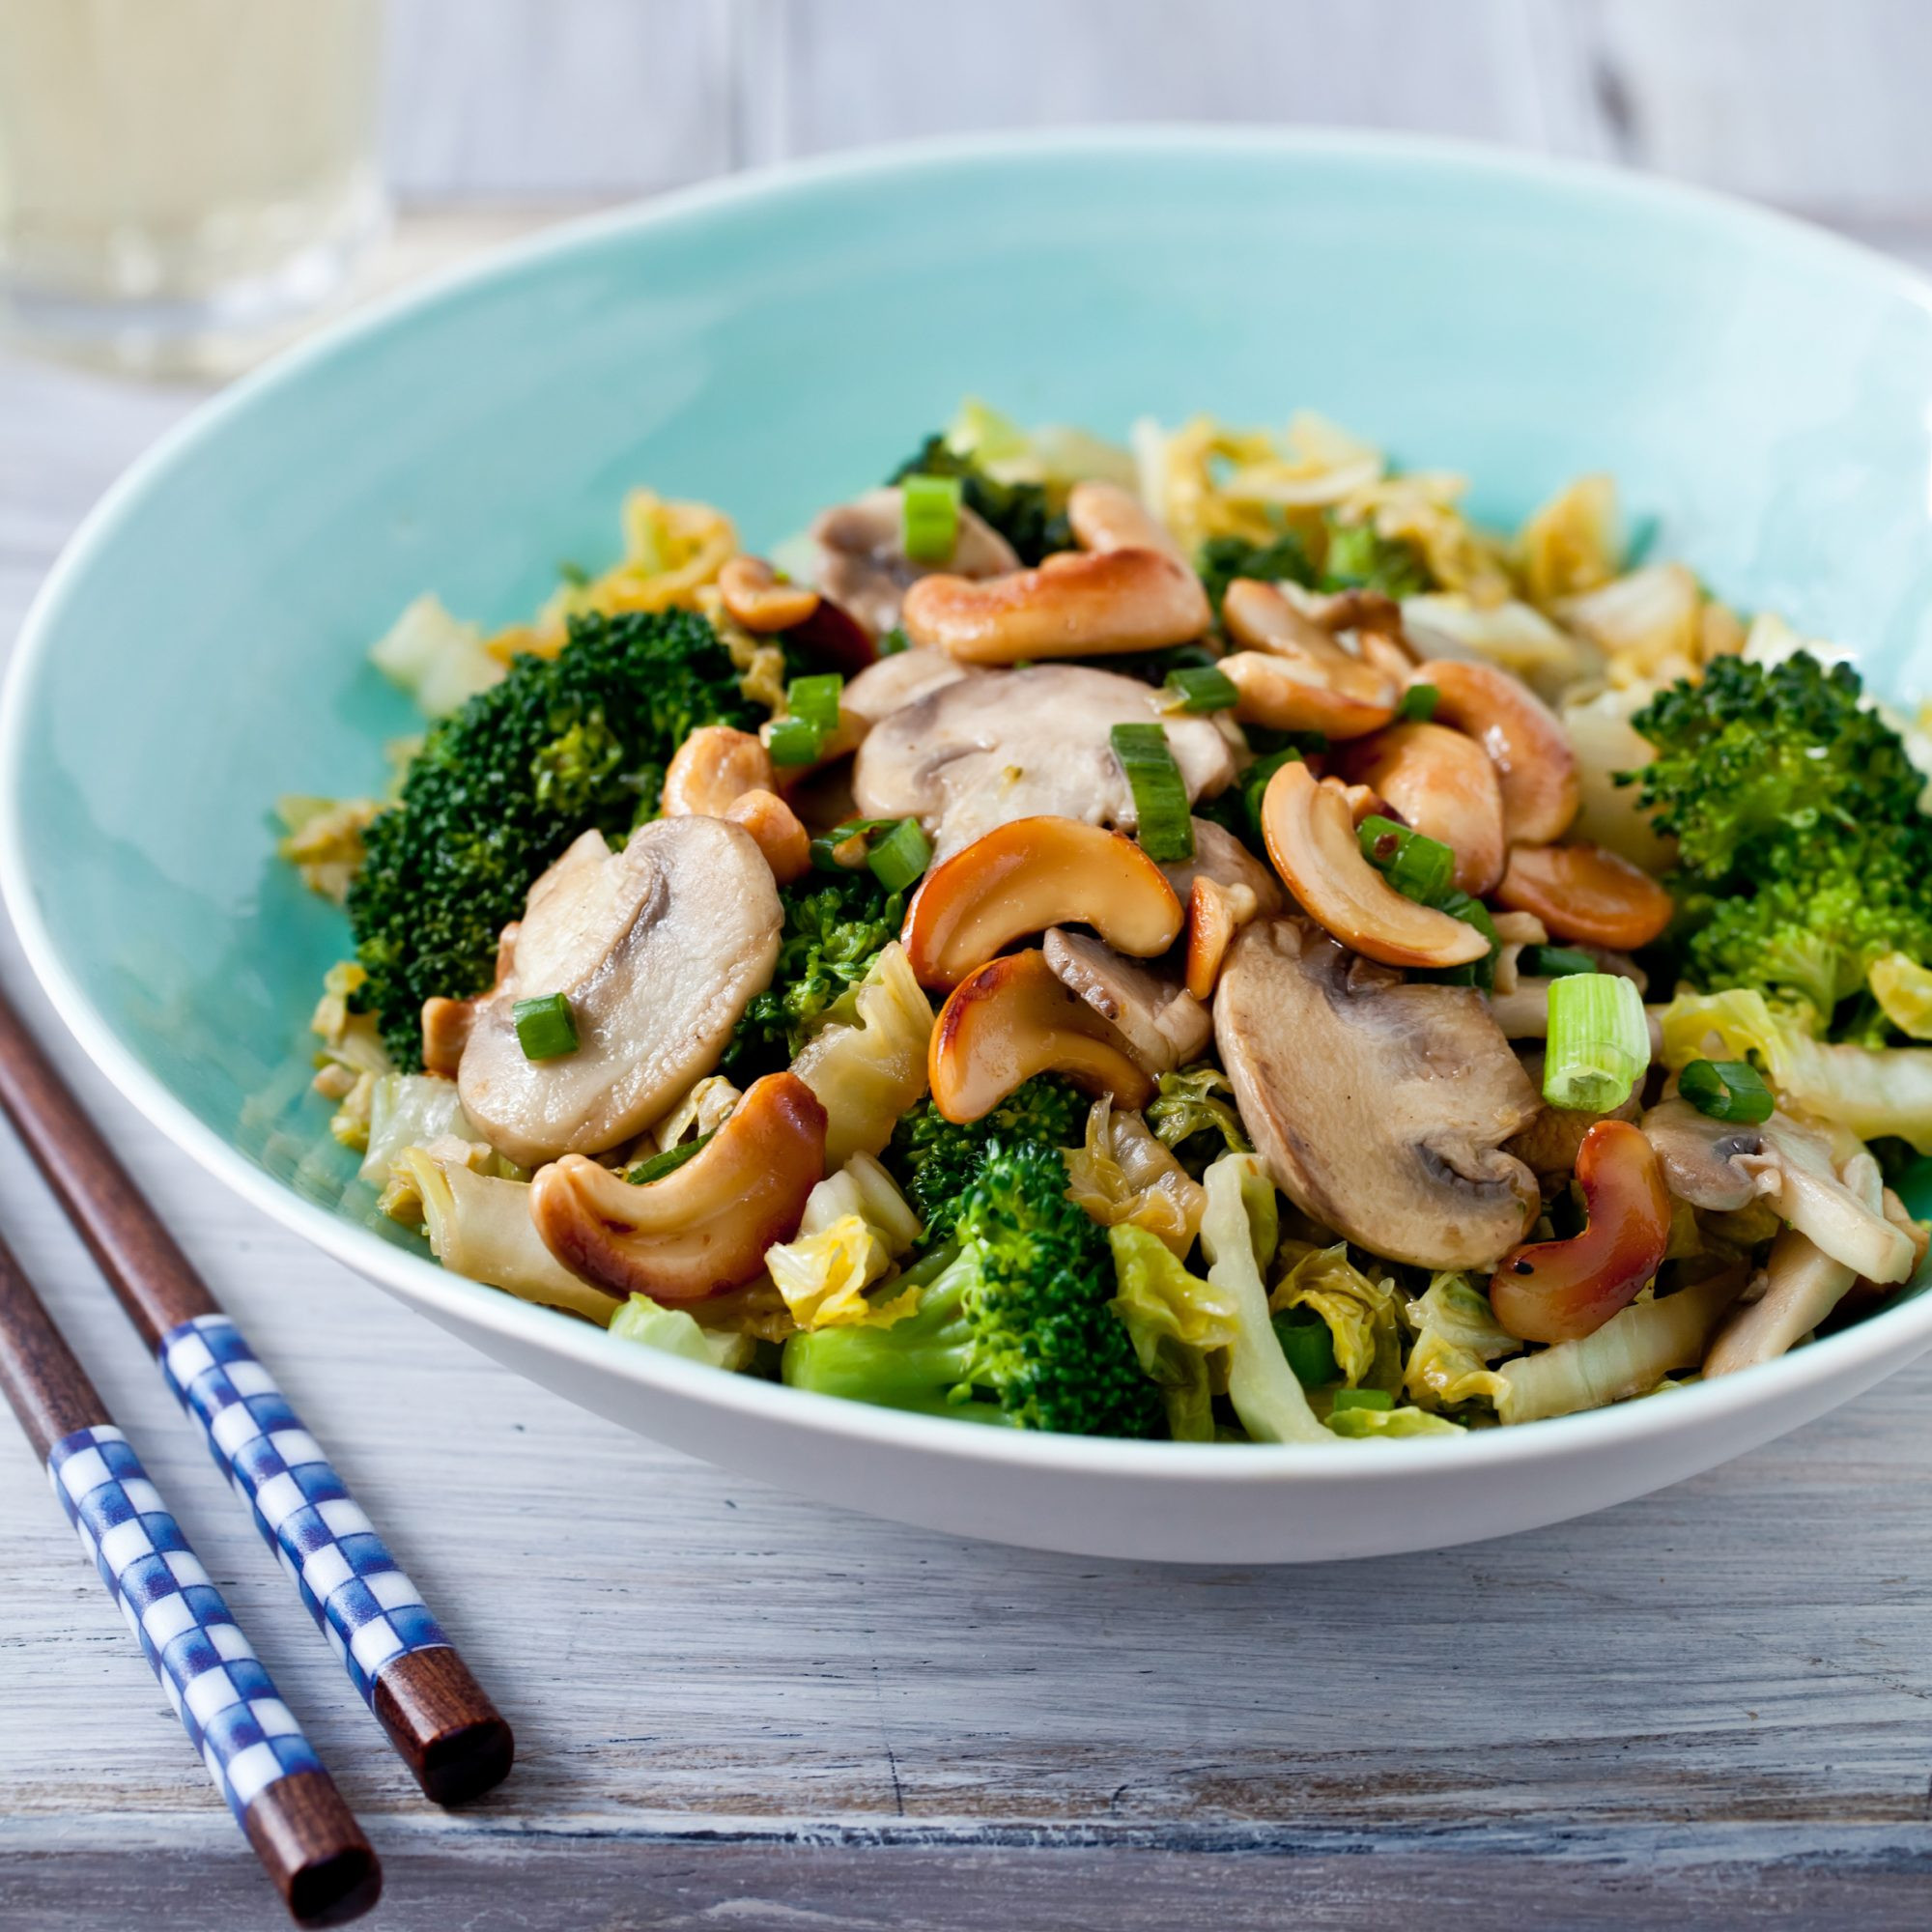 Stir Fry Vegetarian Recipes
 Stir Fried Ve ables with Toasted Cashews Recipe Quick